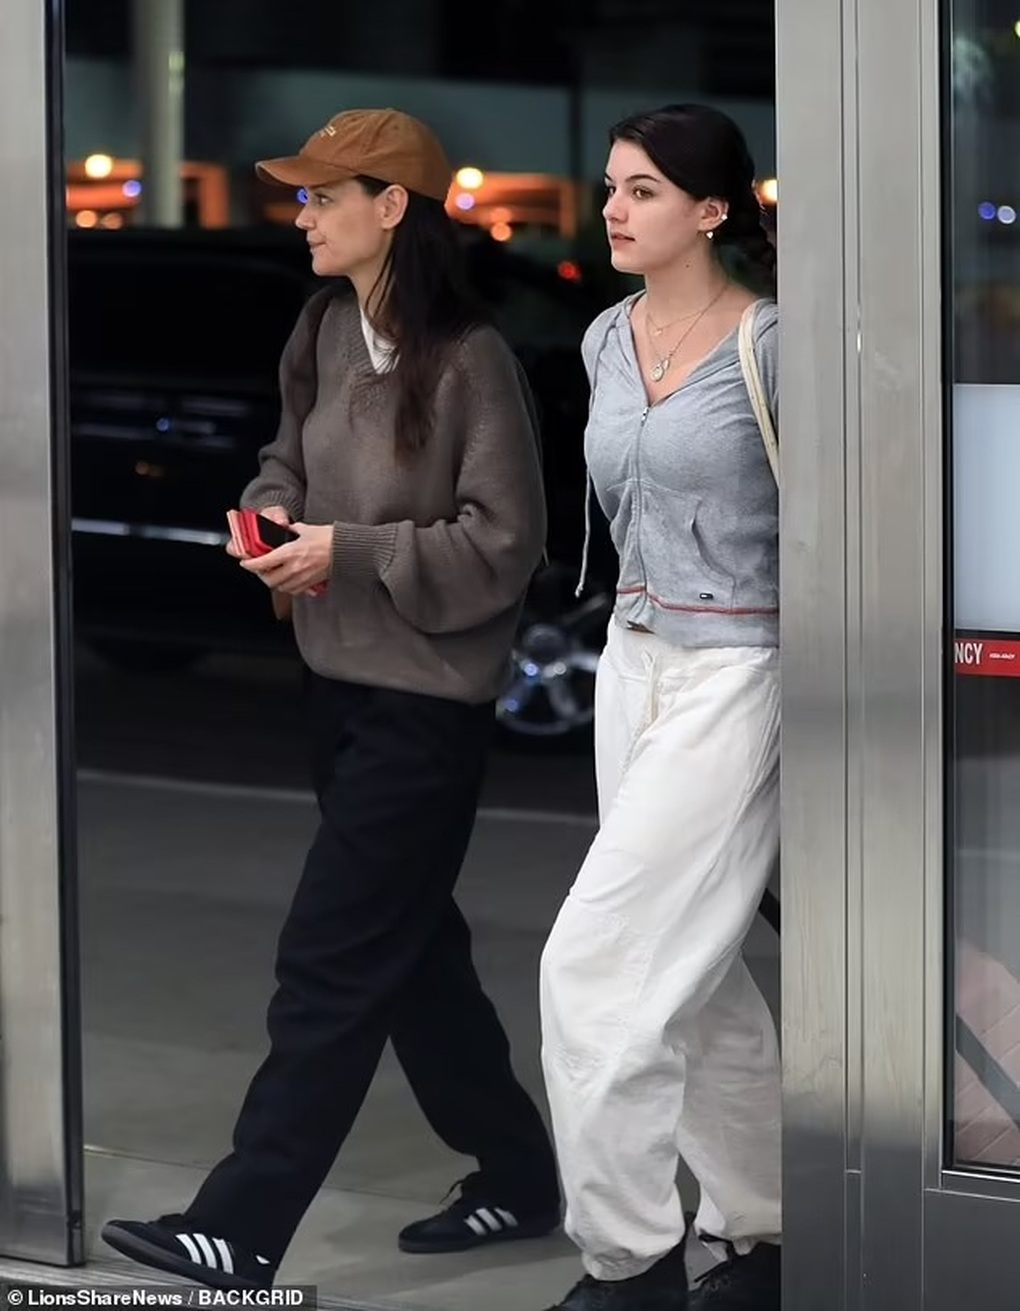 At 17 years old, Suri Cruise is almost as tall as her mother, casual but attractive style - 2